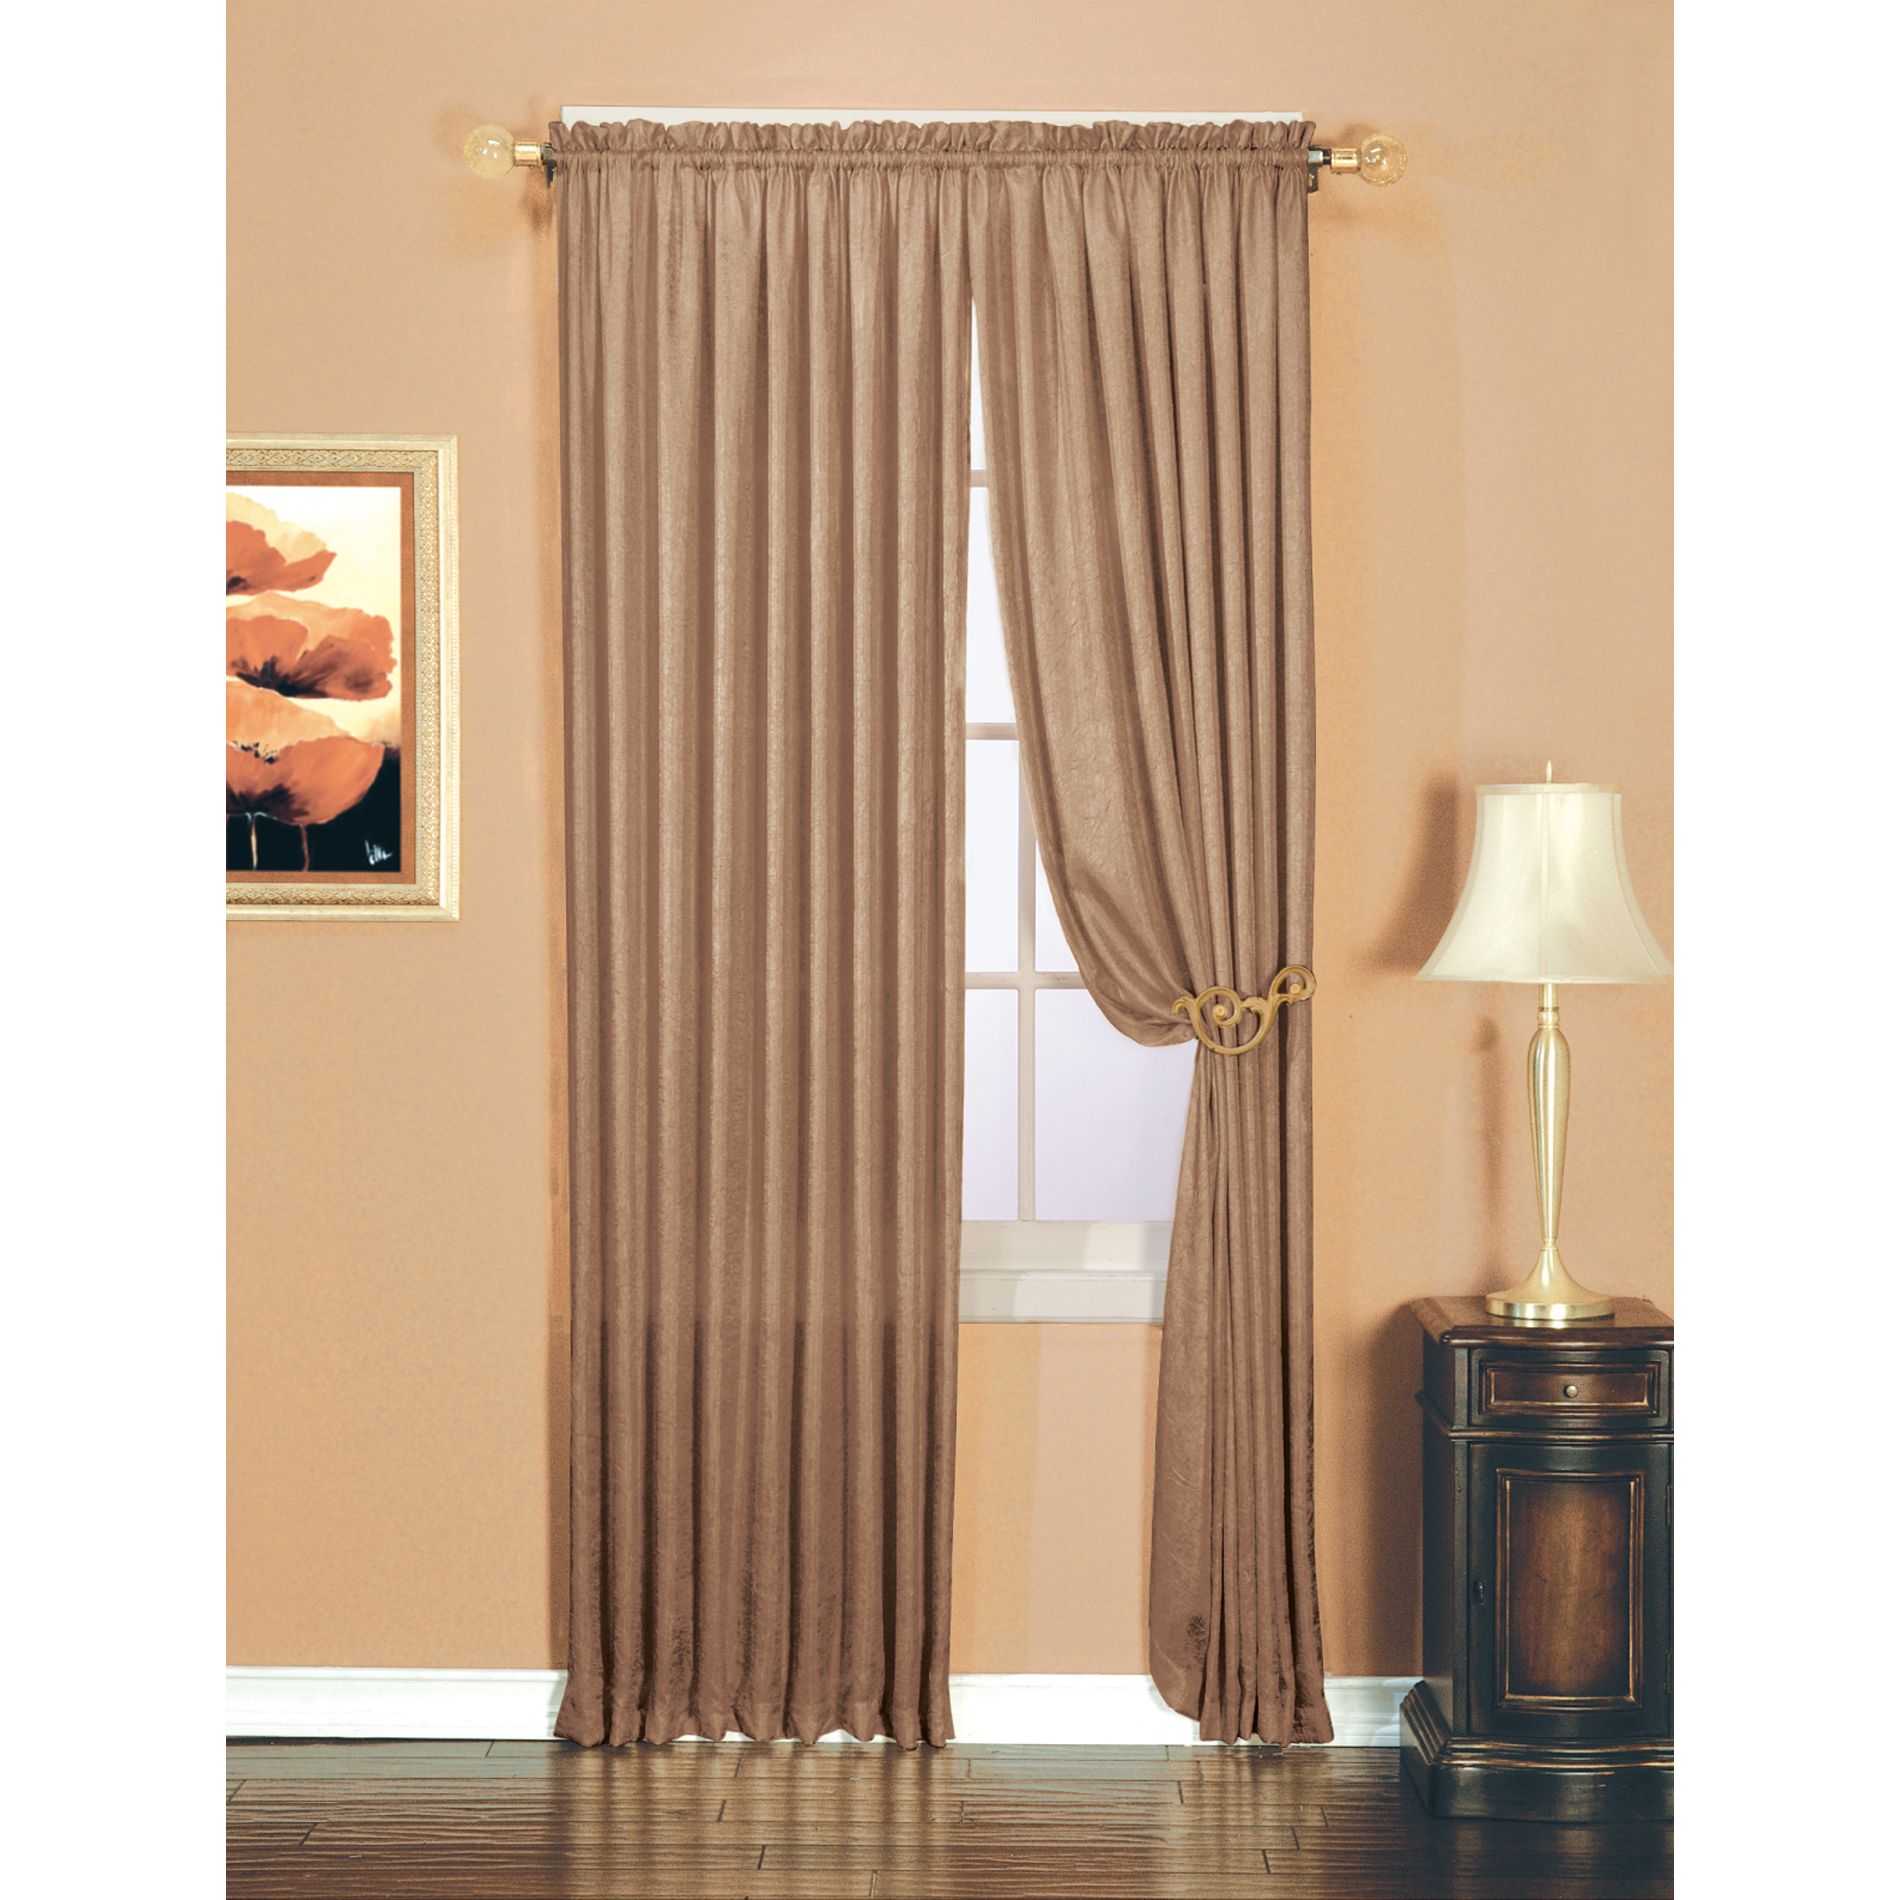 UPC 072000157695 product image for Essential Home Luxury Crushed Faux Silk Window Panel Taupe - KMART CORPORATION | upcitemdb.com